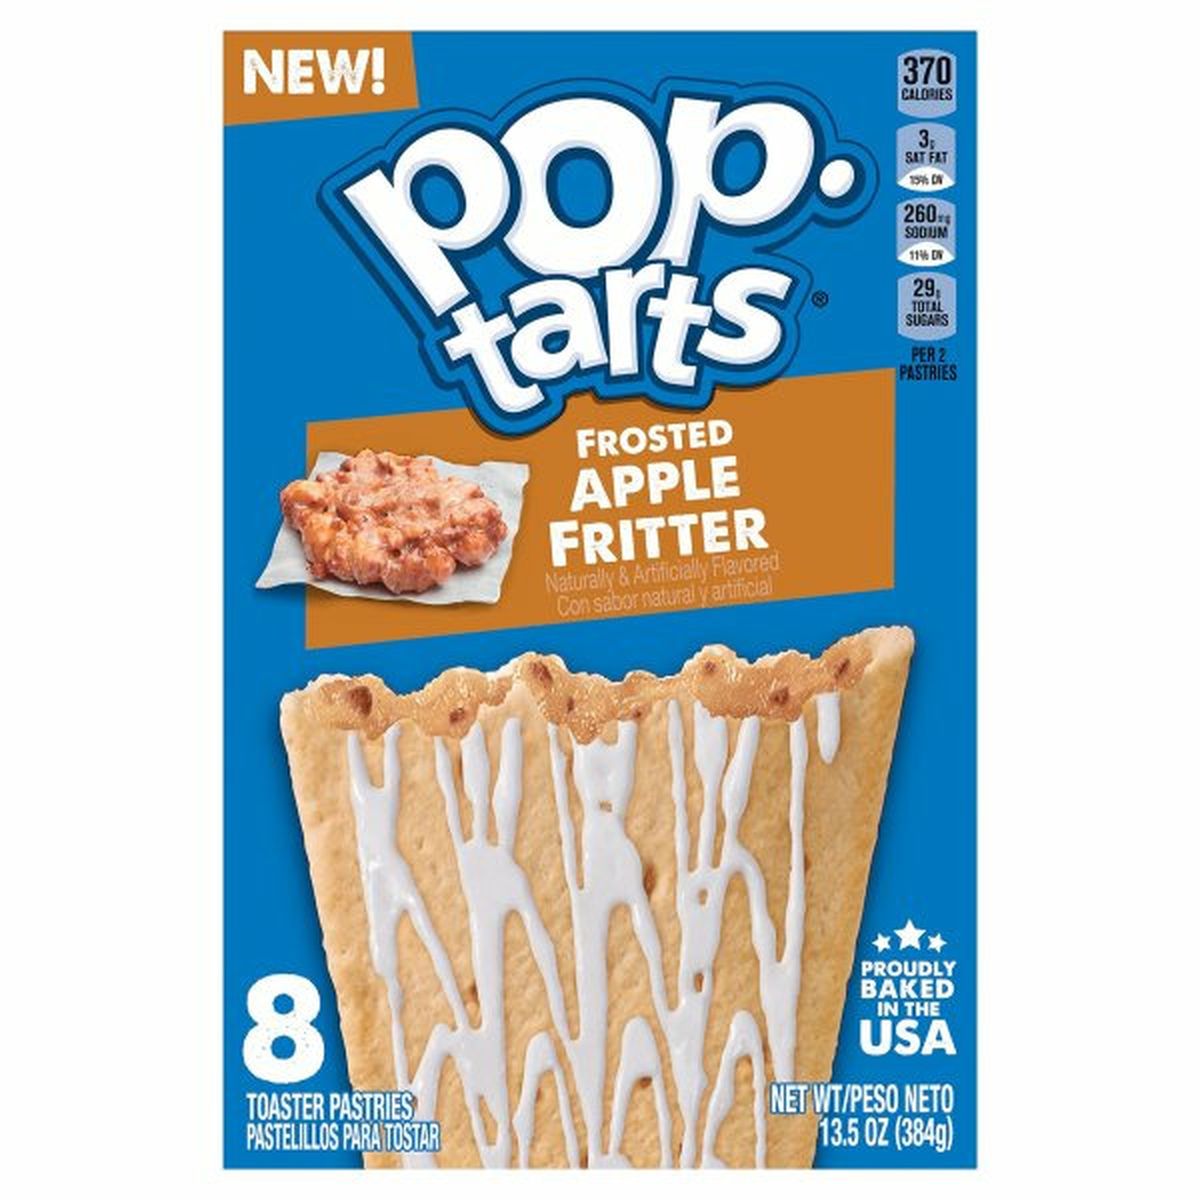 Calories in Kellogg's Pop-Tarts Toaster Pastries, Apple Fritter, Frosted